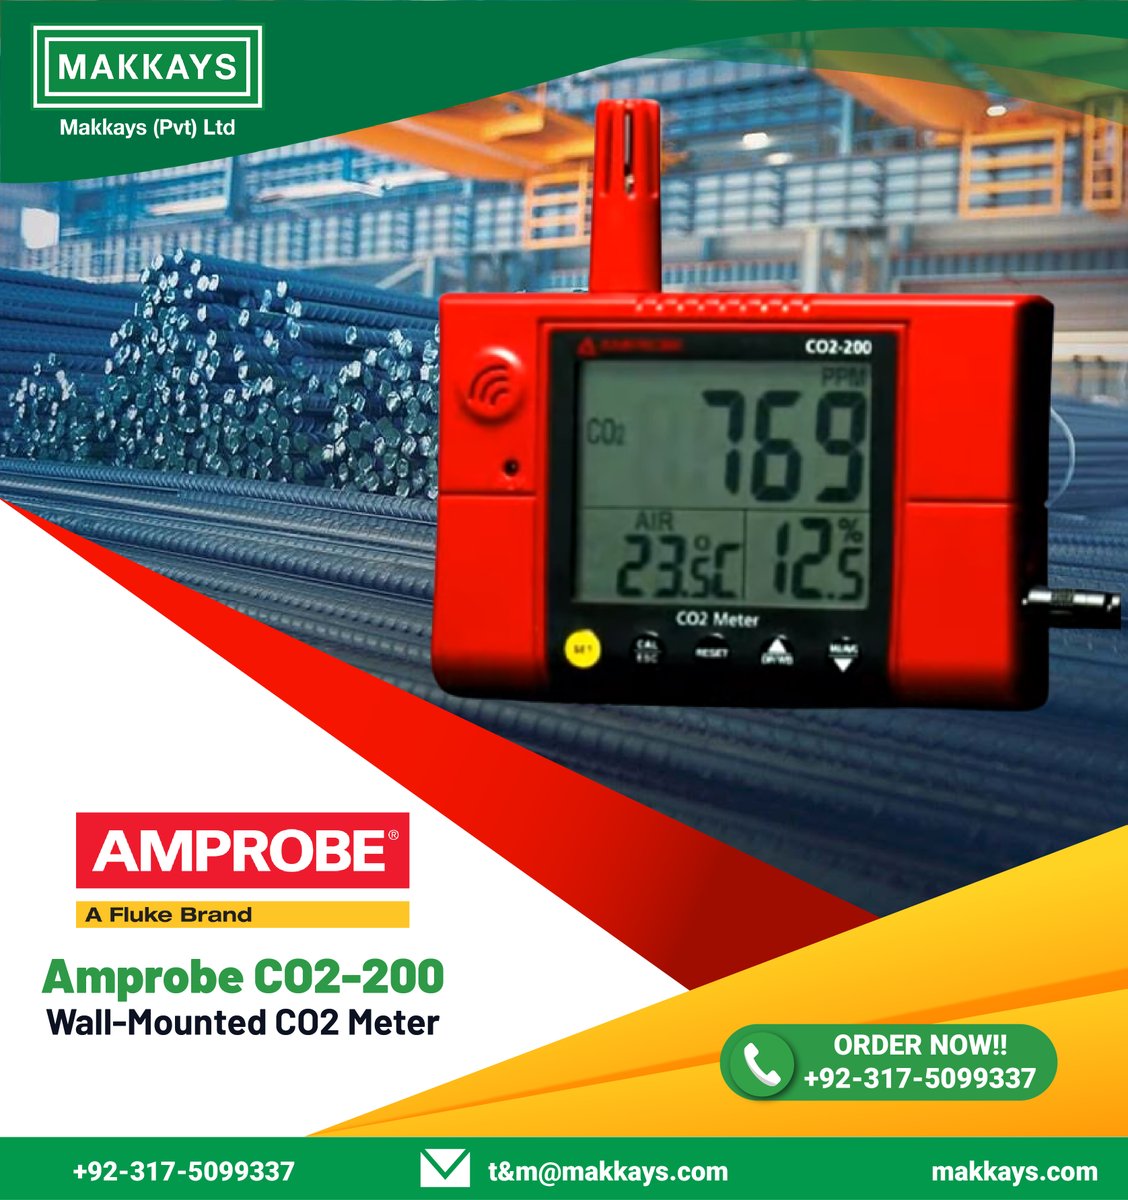 The #Amprobe CO2-200 Wall Mounted CO2 Meter gives users instant feedback with CO2 levels, with additional temperature and humidity #measurements.
#electricalequipment #electricalequipment #technicalservices #testinginstruments #testandmeasurement #electricservices #makkays